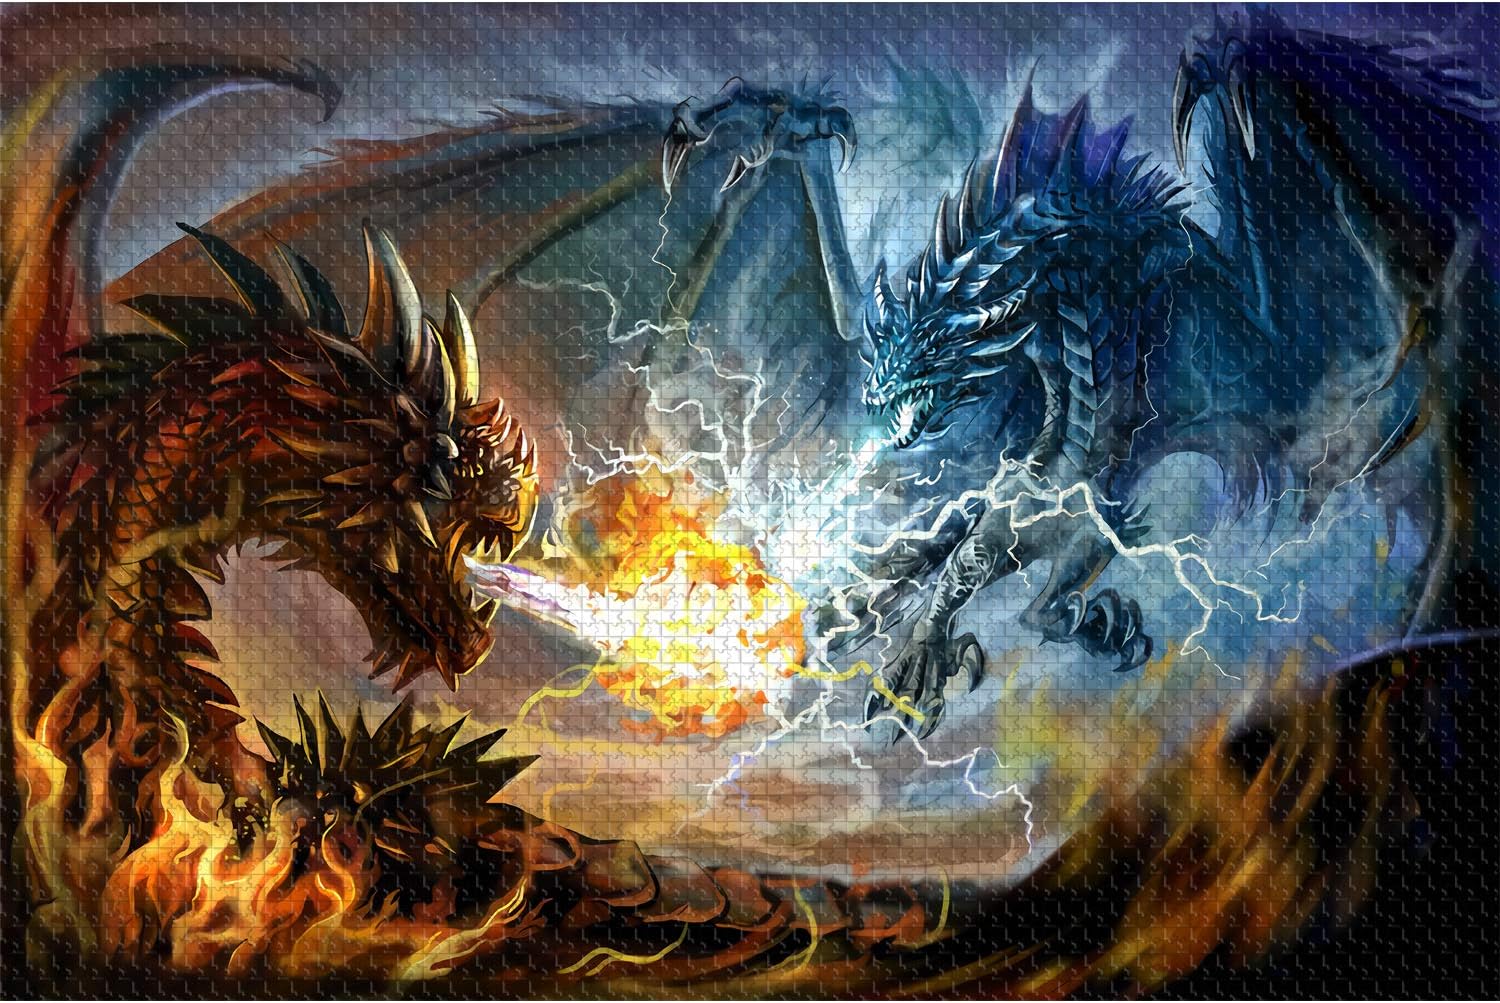 Puzzles for Adults 1000 Piece Jigsaw Puzzles Fire Dragon and Electric Dragon Fight Puzzle Game for Indoor Activity Family Game Toy Gifts (27.5x 19.7)